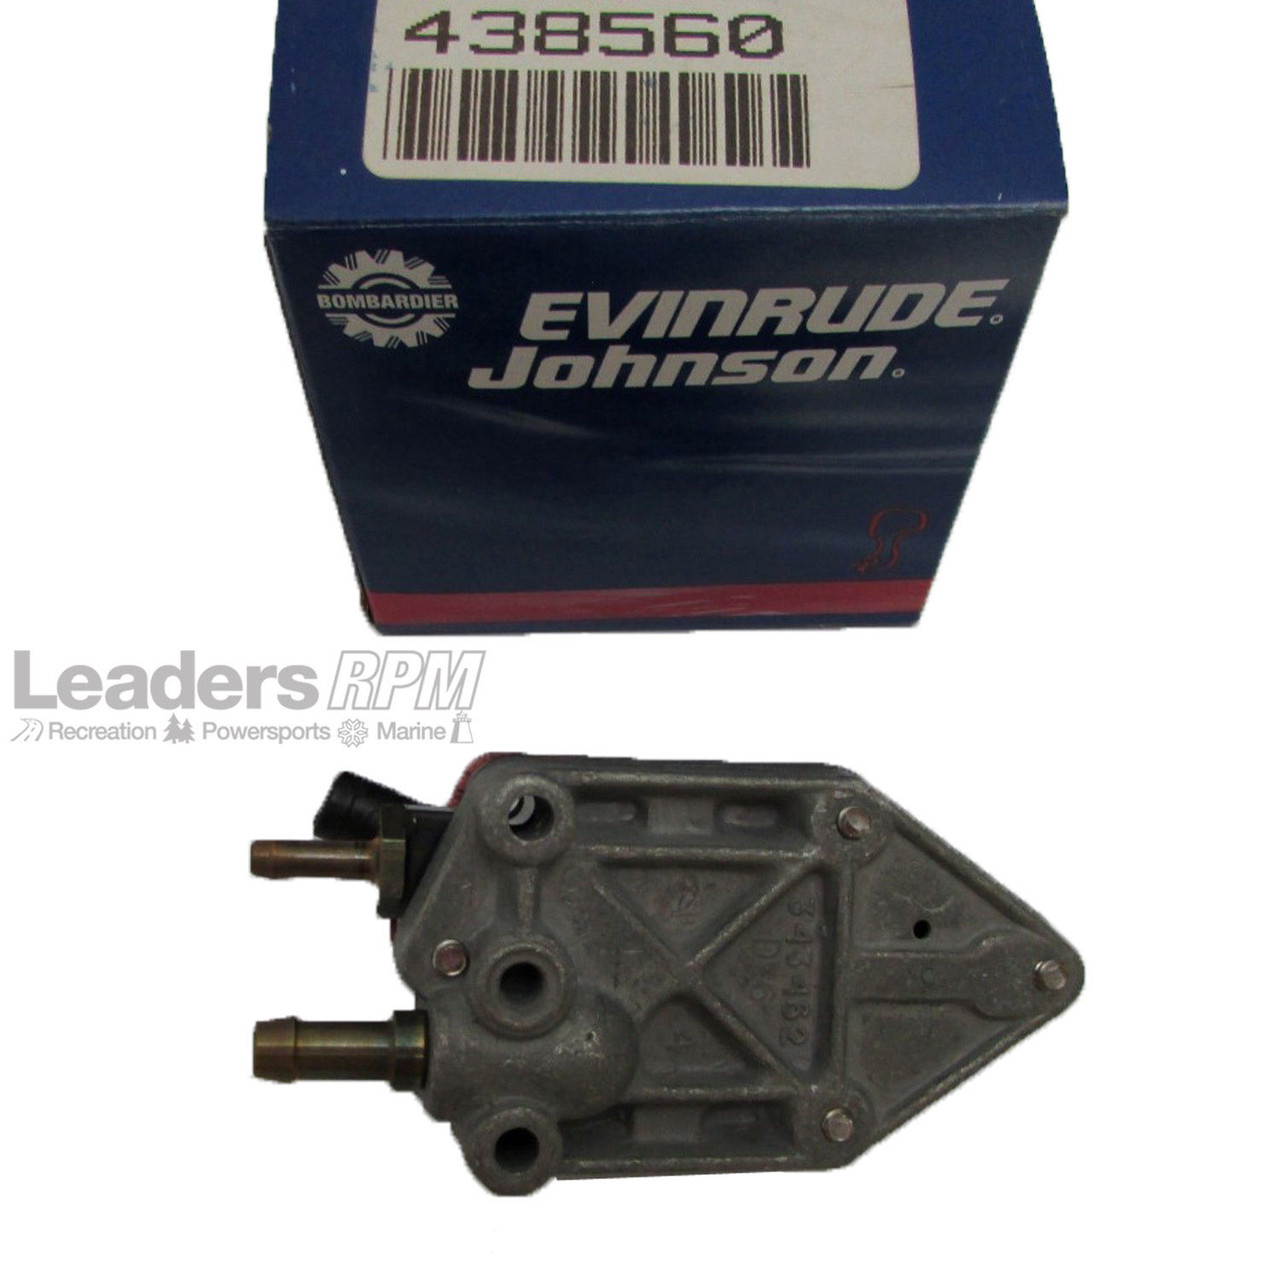 Johnson/Evinrude/OMC New OEM FUEL PUMP ASSEMBLY 0438560, 438560